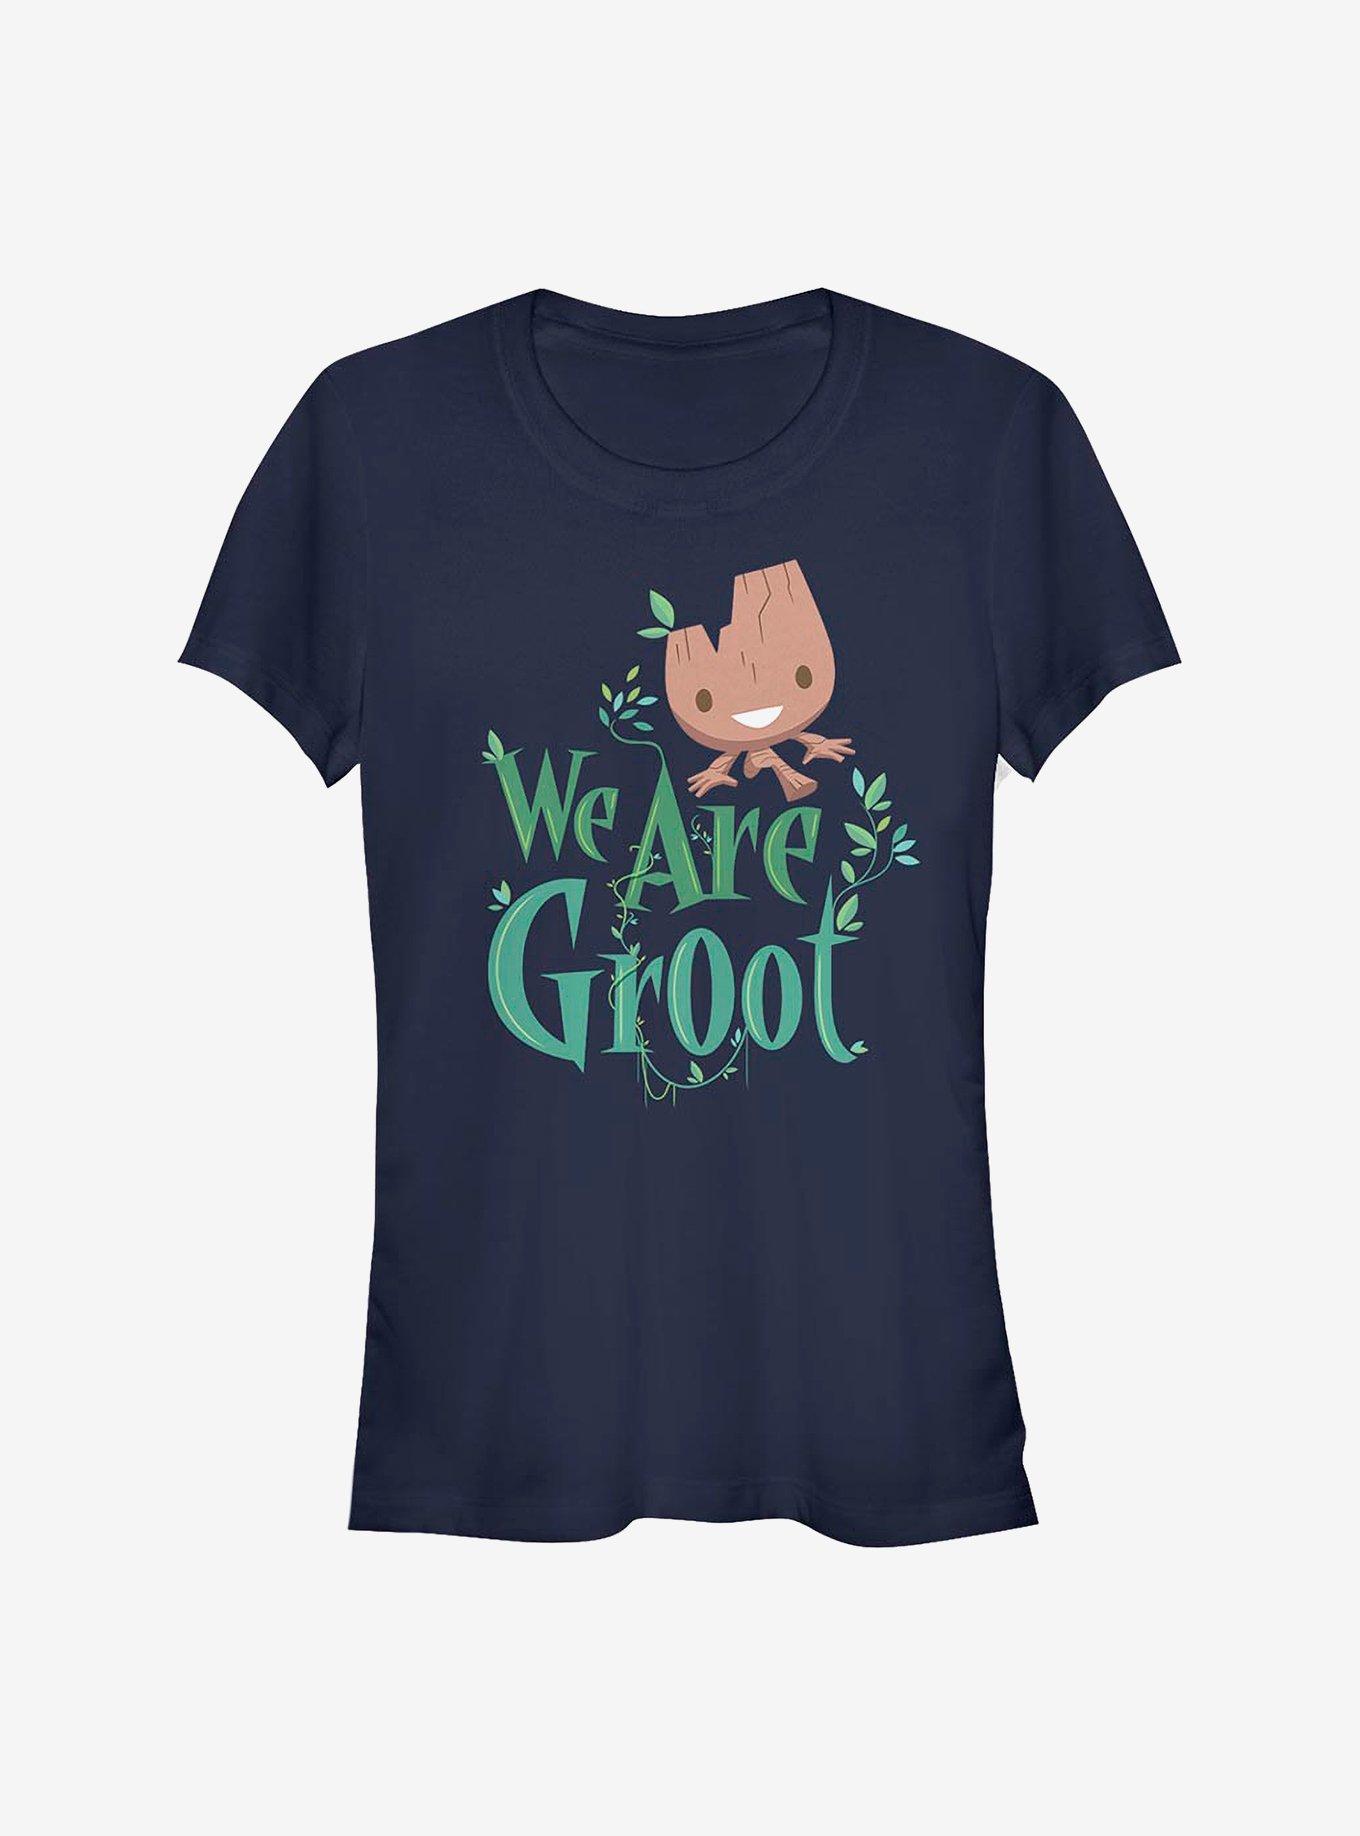 Marvel The Guardians Of The Galaxy Groots World Girls T-Shirt, NAVY, hi-res